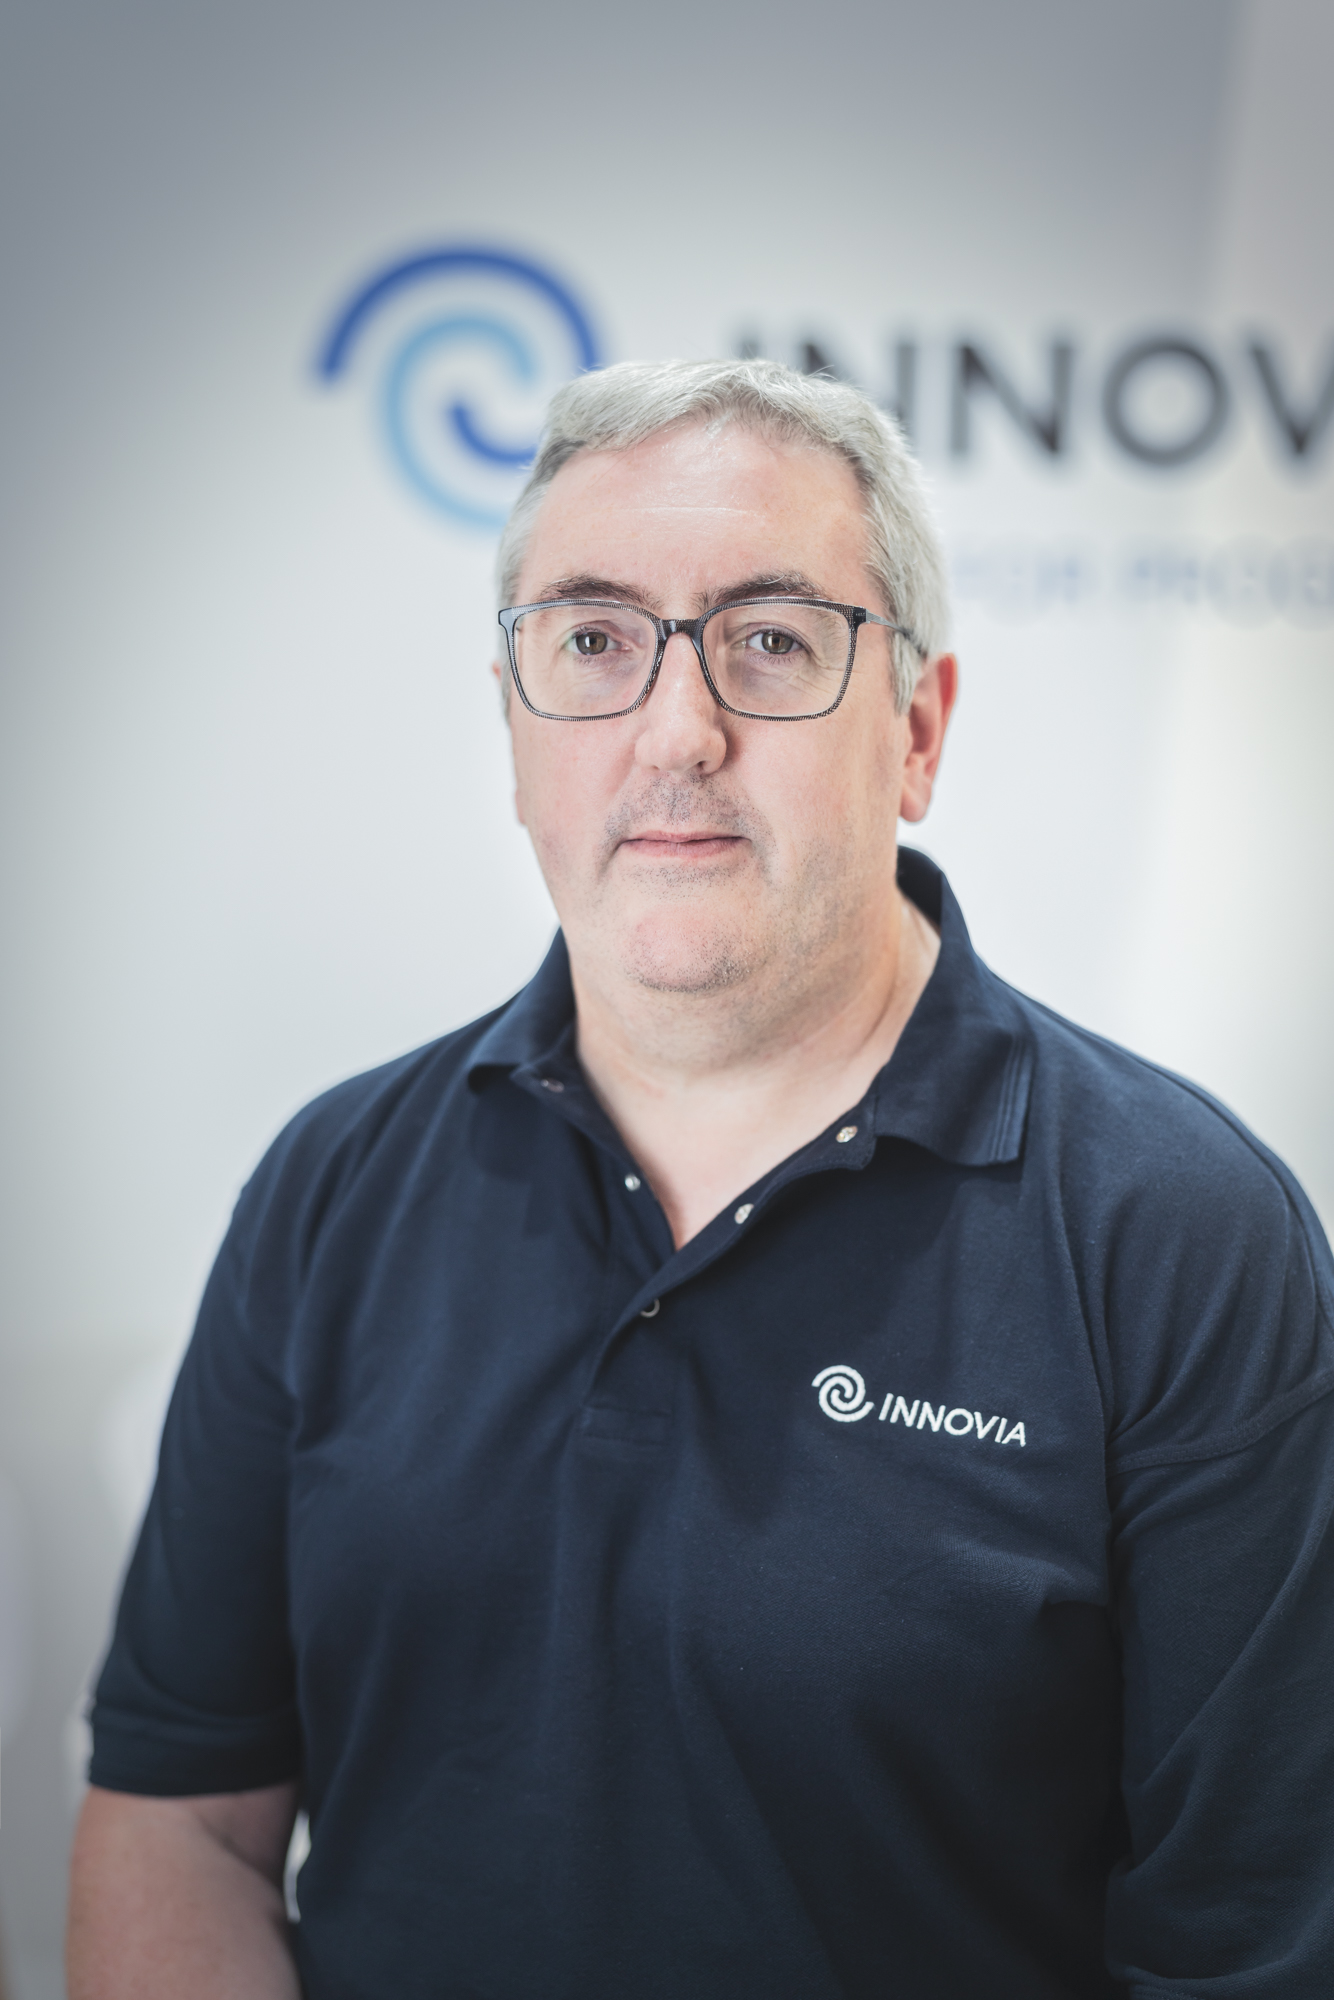 INNOVIA APPOINTS NEW BUSINESS UNIT DIRECTOR PACKAGING EUROPE